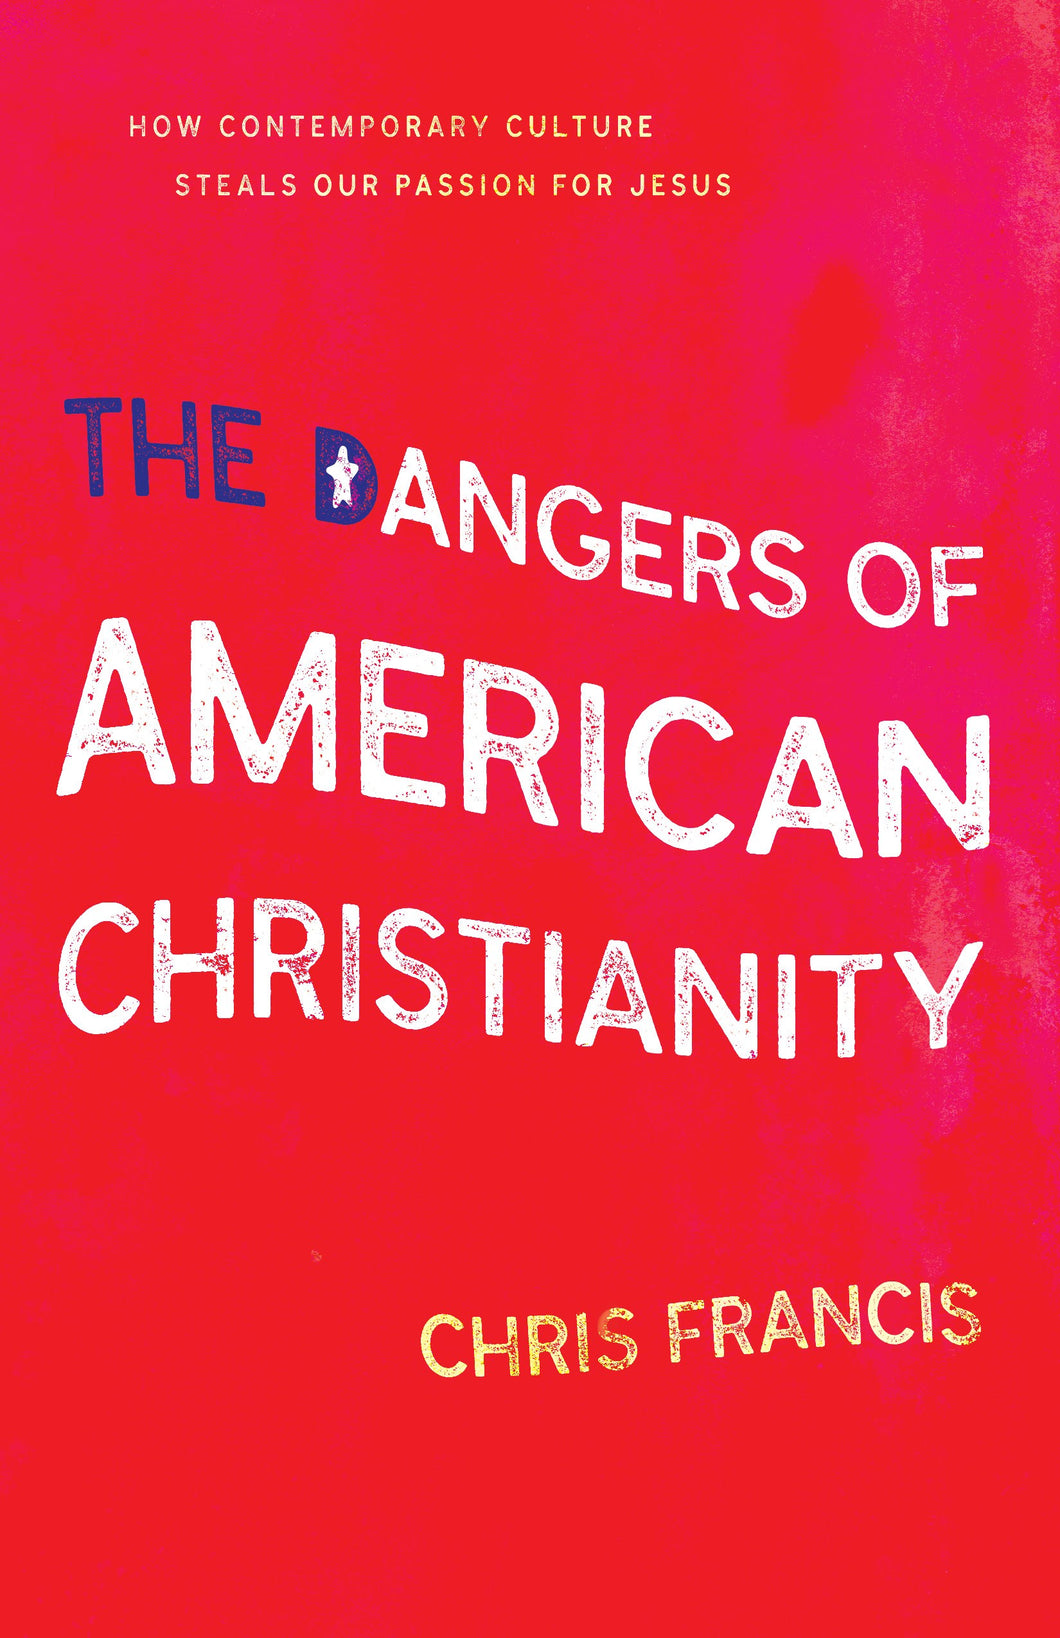 THE DANGERS OF AMERICAN CHRISTIANITY